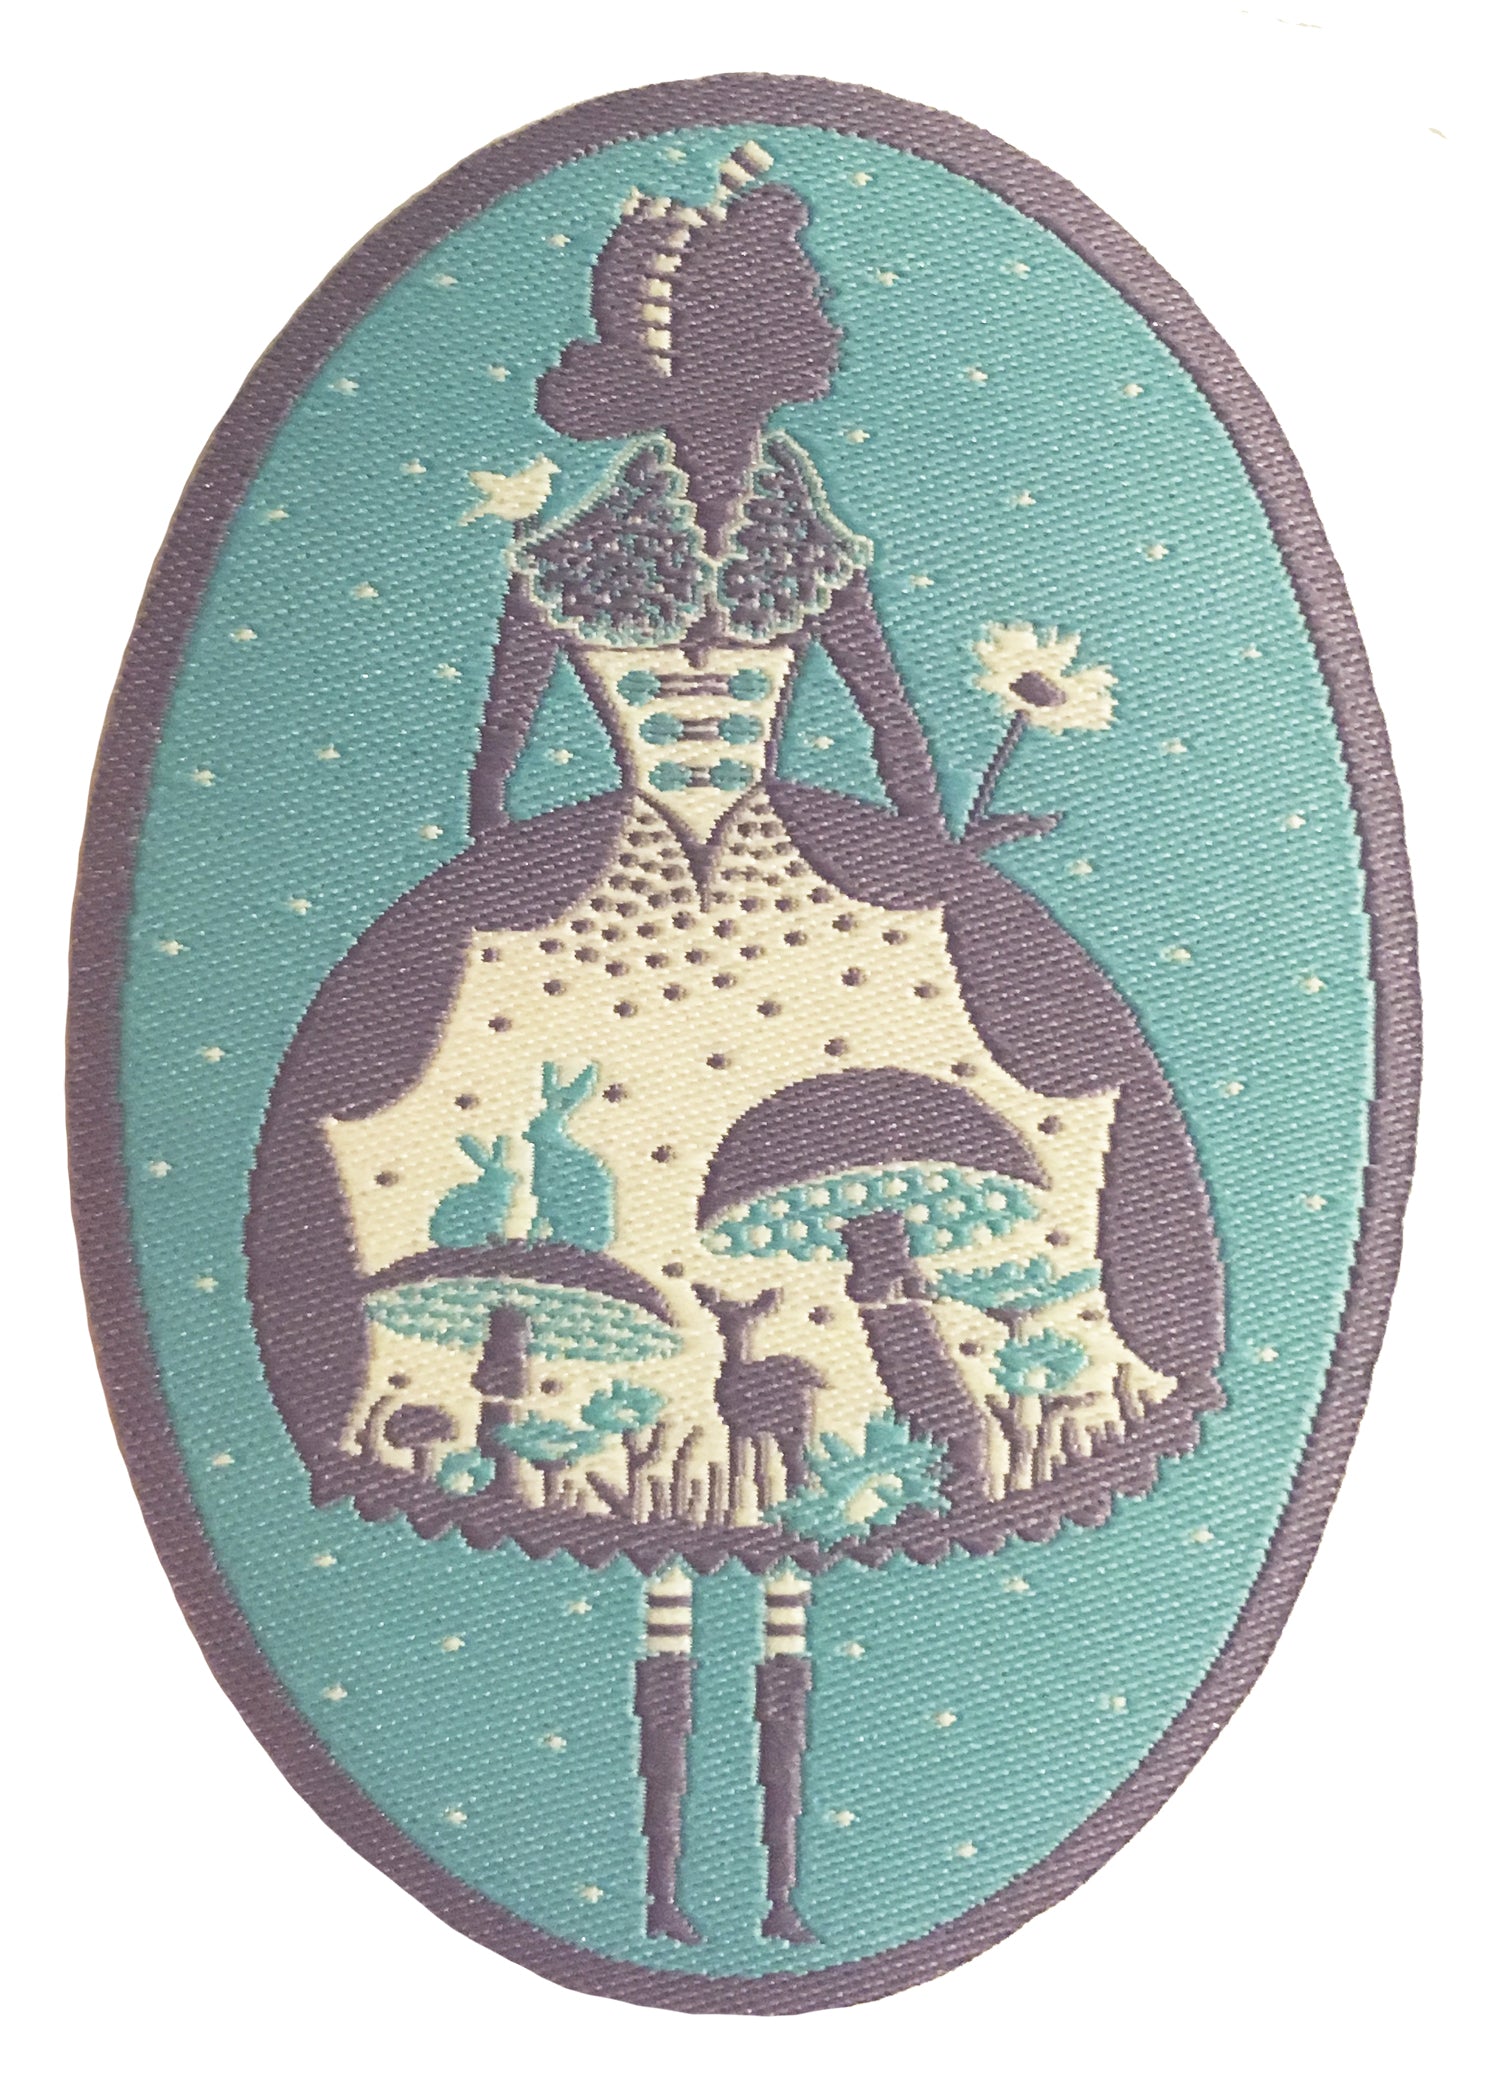 Light blue, grey and white oval patch with Alice in Wonderland design